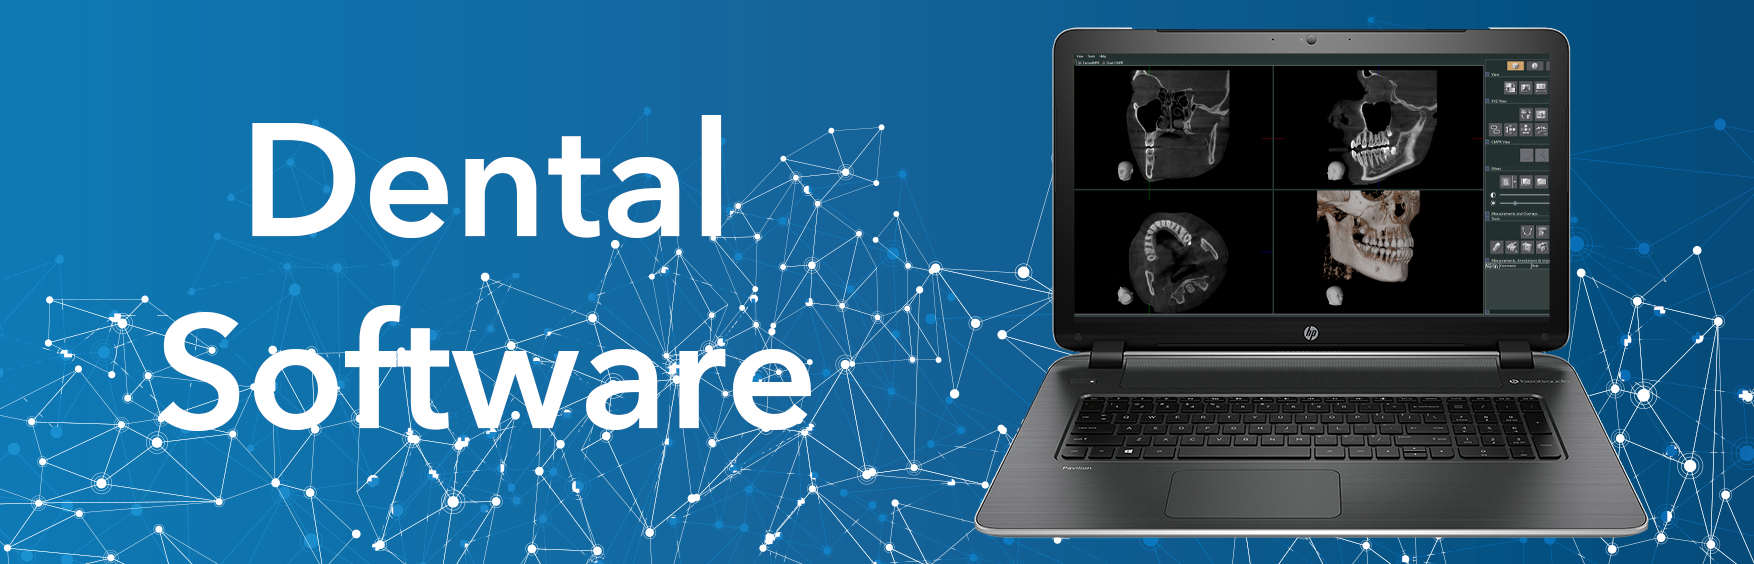 Dental imaging and practice management software offered by Dental TI